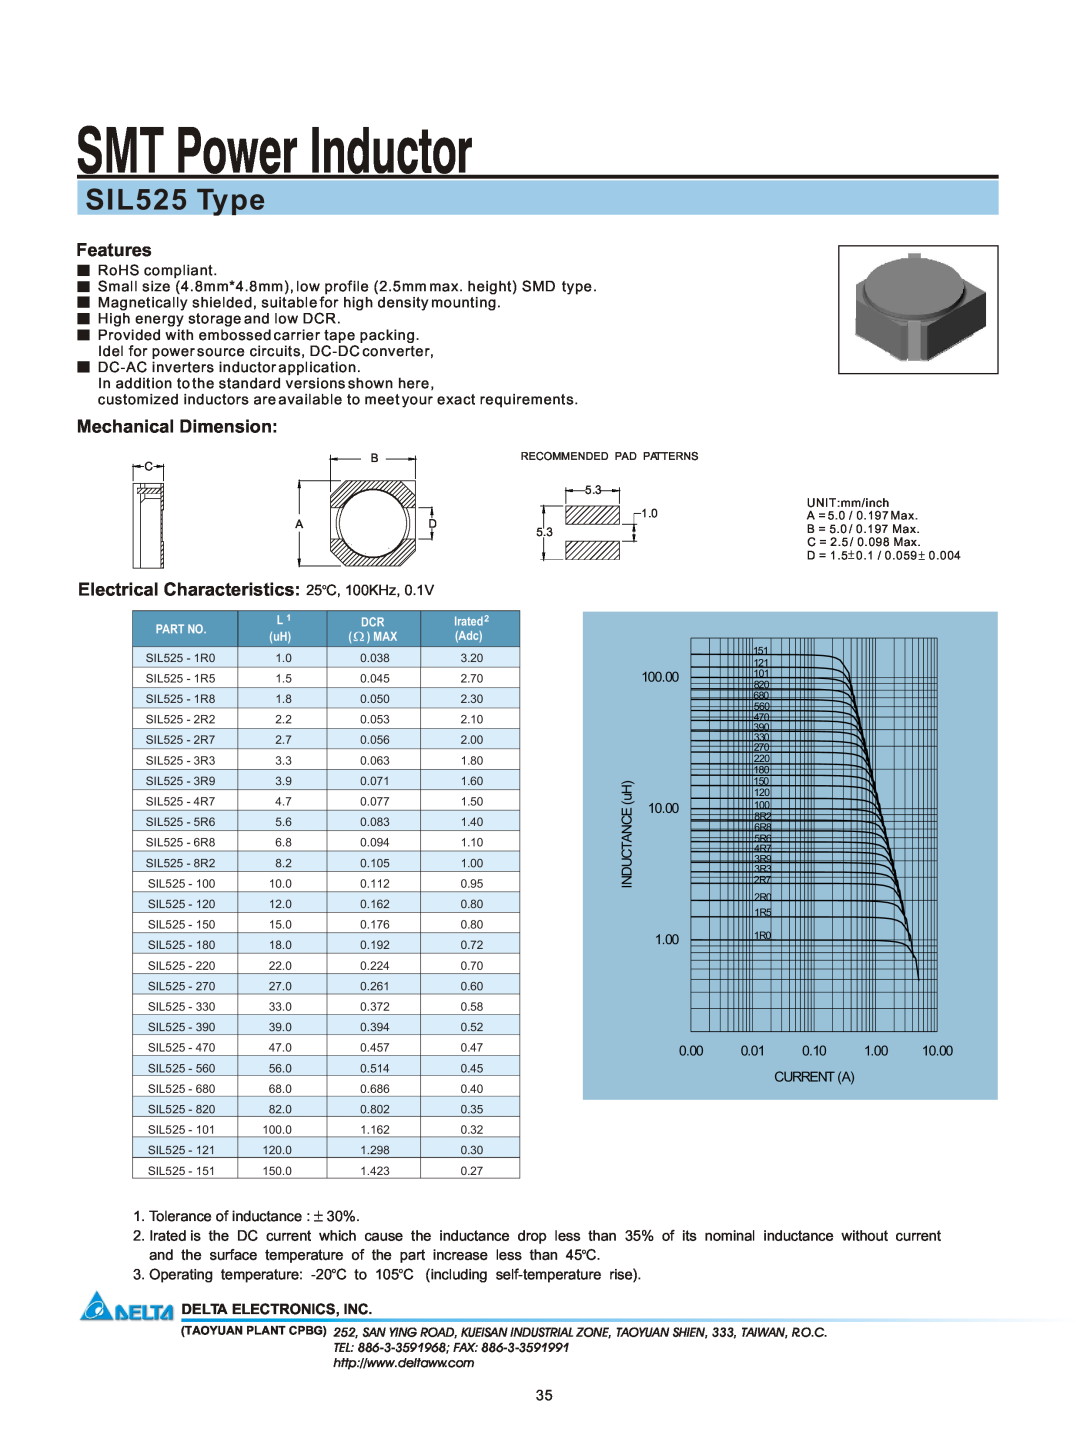 Delta Electronics manual SMT Power Inductor, SIL525 Type, Features, Mechanical Dimension, Delta Electronics, Inc 